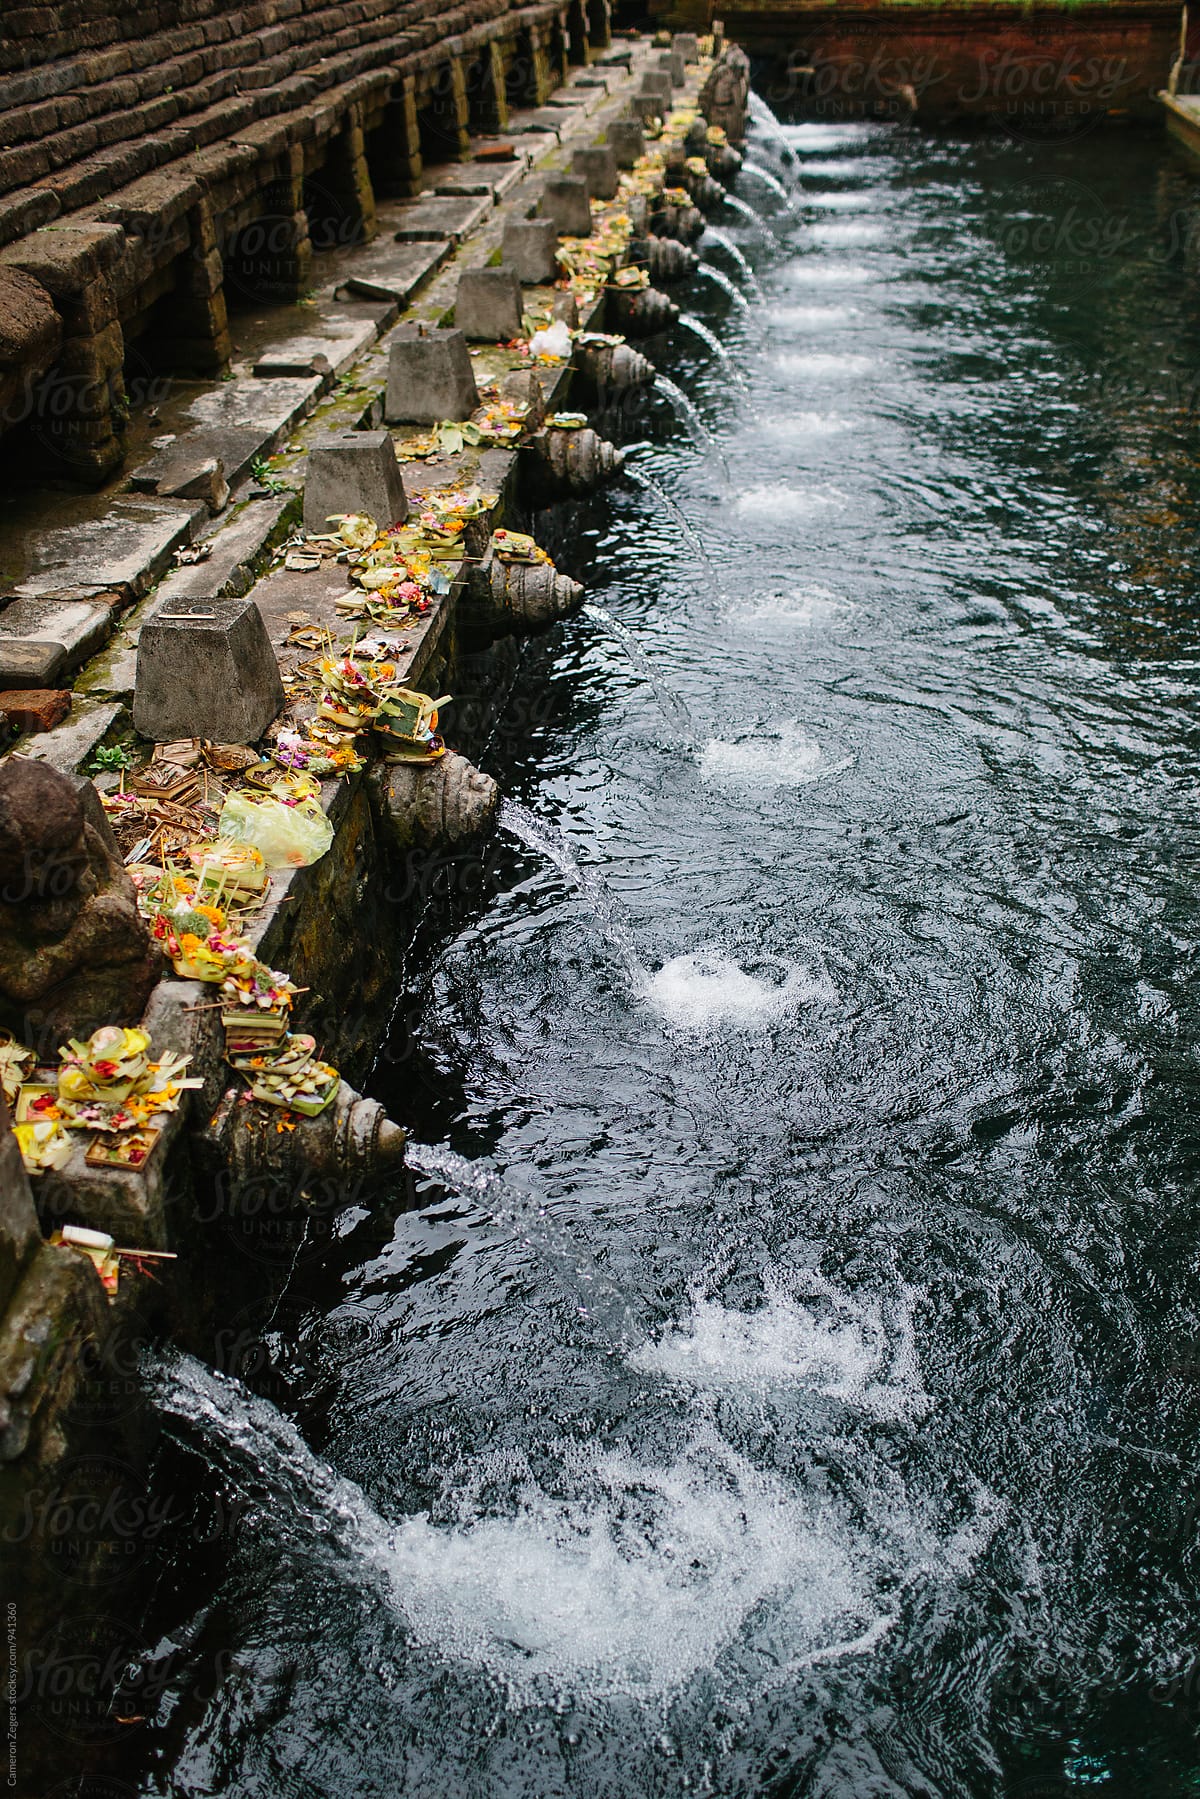 Fountains at Tirta Empul Holy Water Temple in Bali, Indonesia.